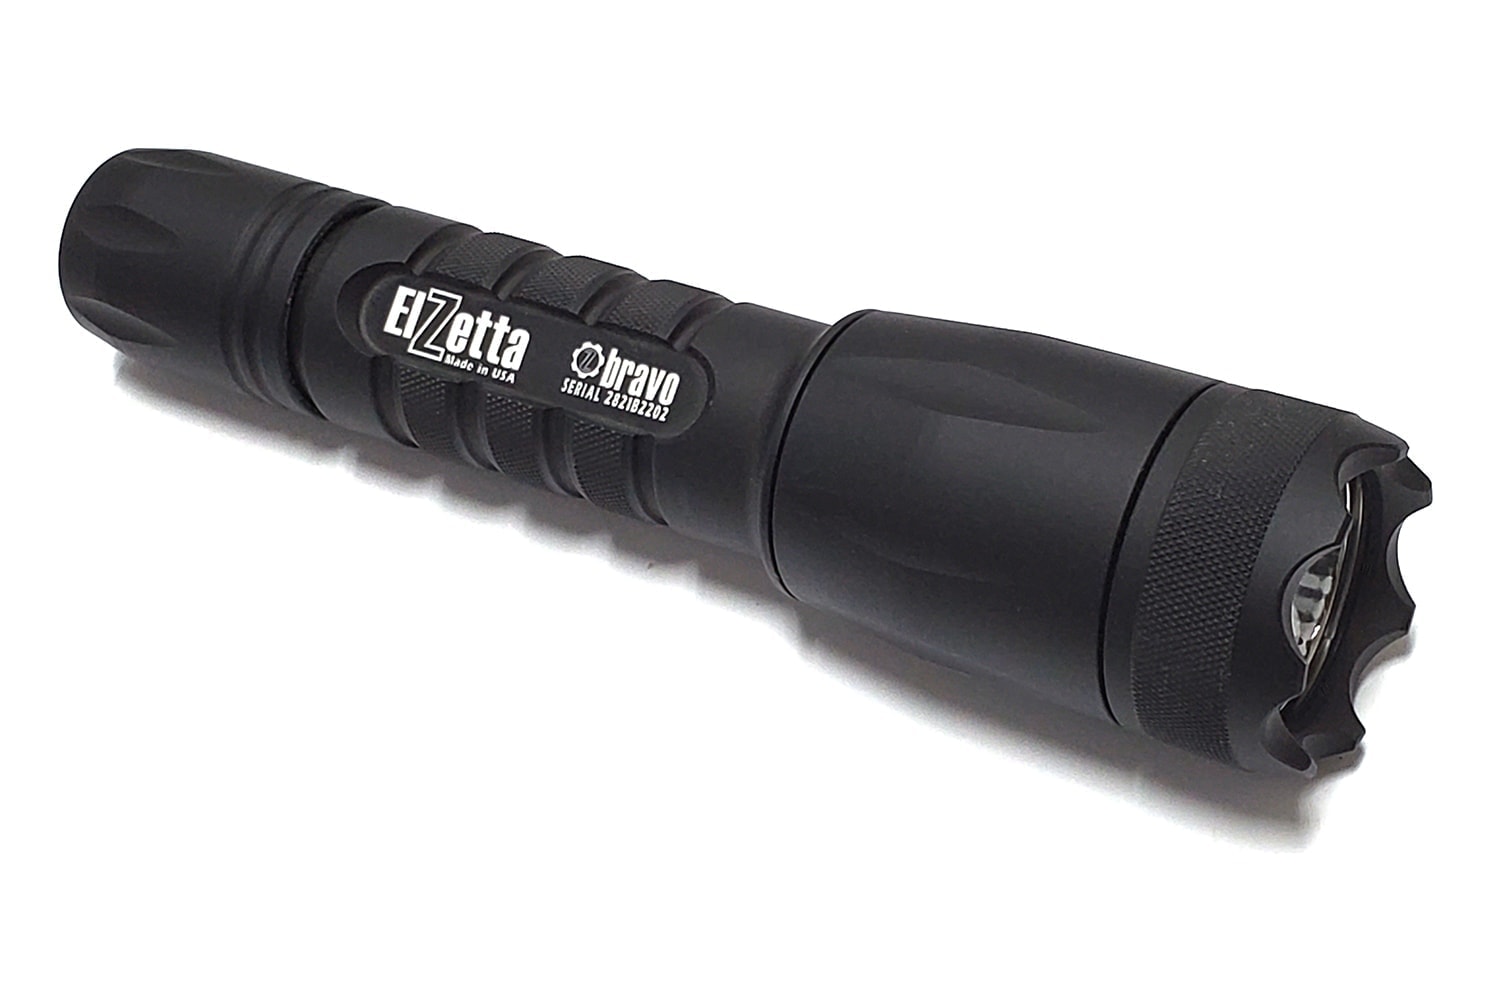 Elzetta Bravo High Candela 2-Cell Flashlight with Crenelated Bezel and High/Low Tailcap